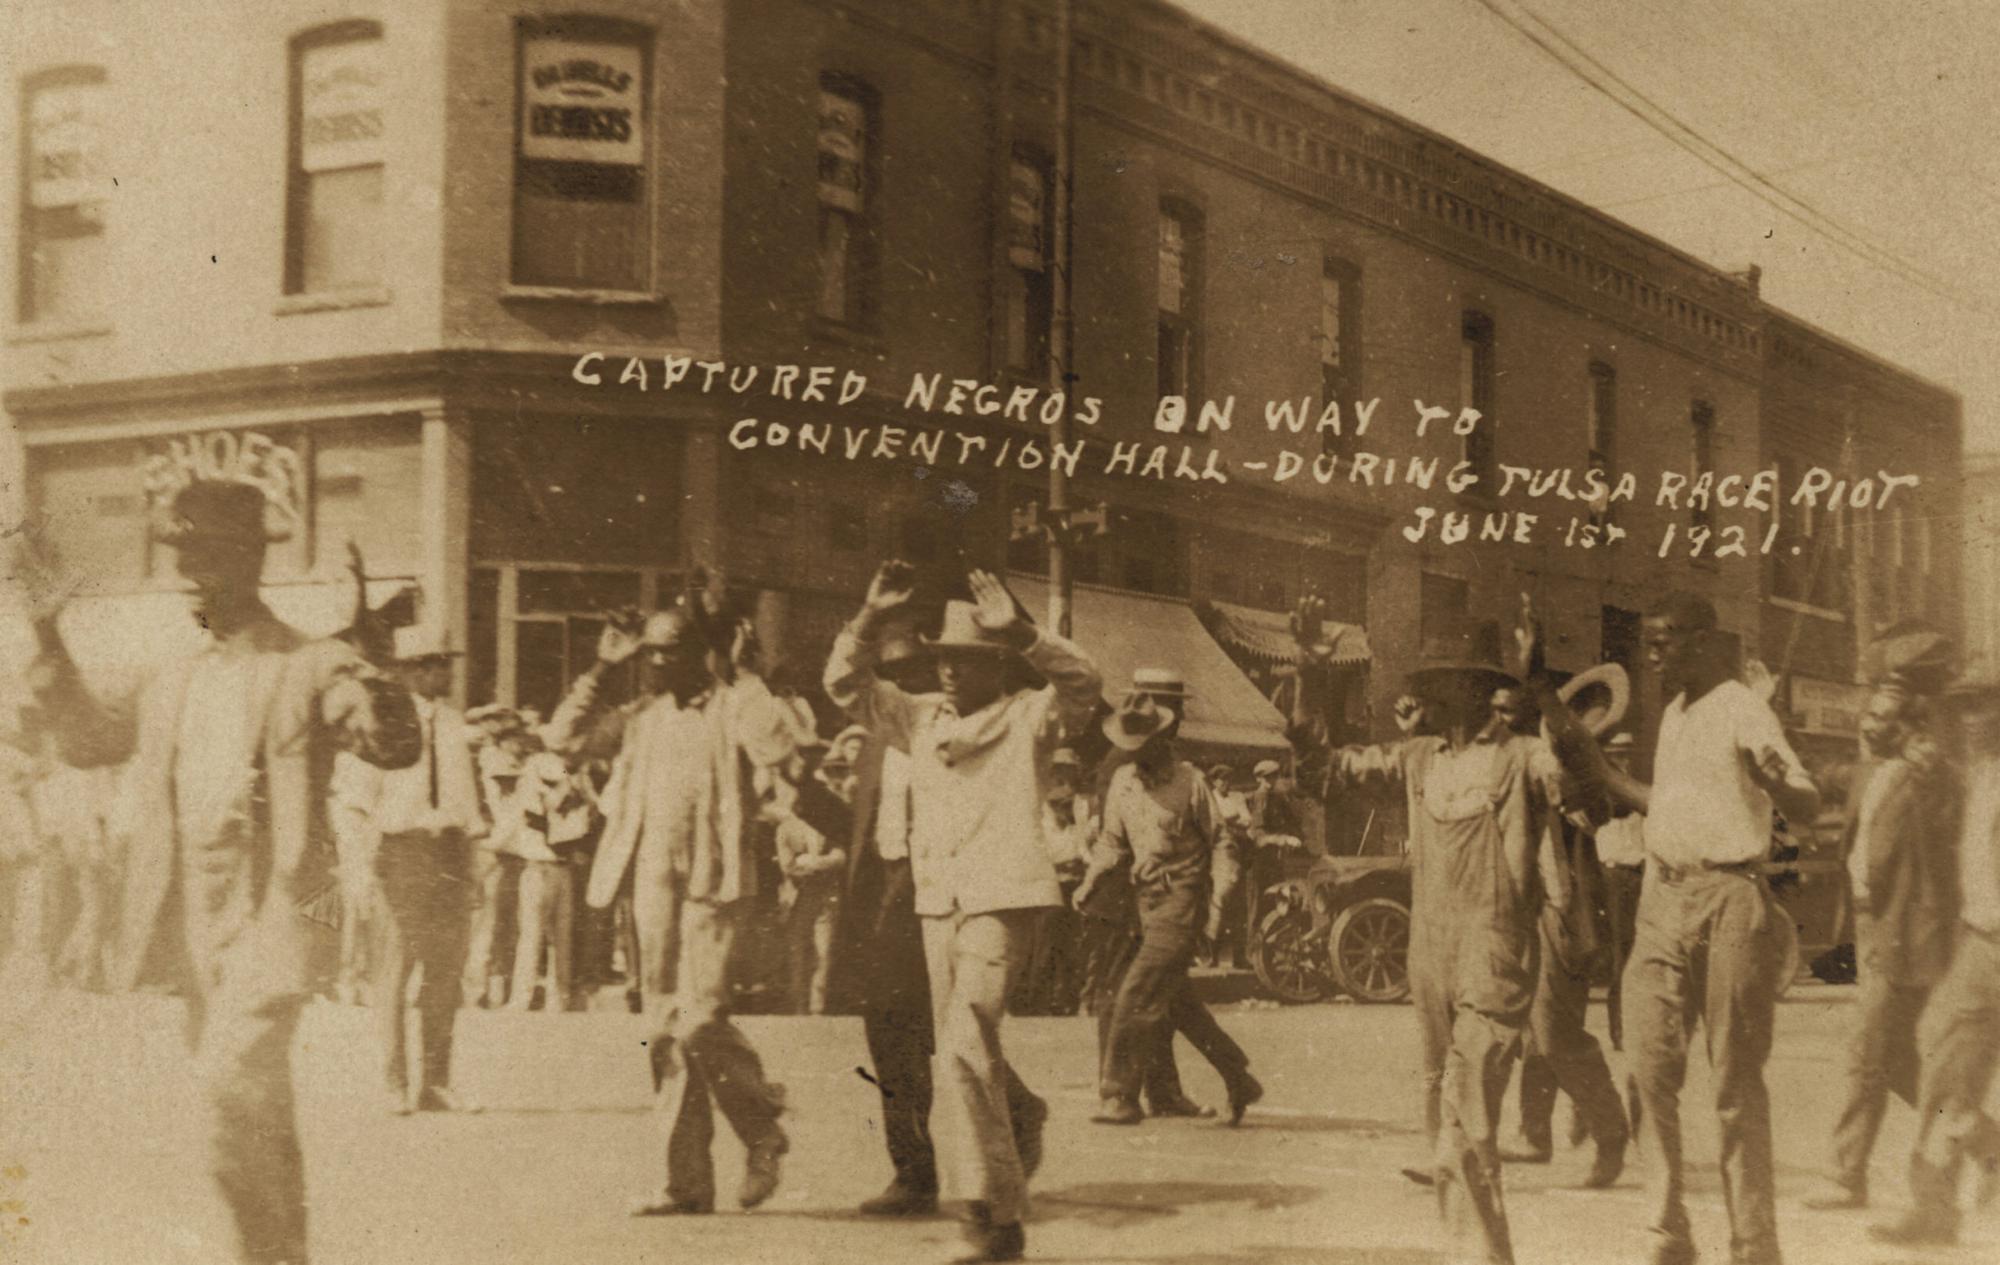 In this photo provided by the Department of Special Collections, McFarlin Library, The University of Tulsa, a group of Black men are marched past the corner of 2nd and Main Streets in Tulsa, Okla., under armed guard during the Tulsa Race Massacre on June 1, 1921. (Department of Special Collections, McFarlin Library, The University of Tulsa via AP)